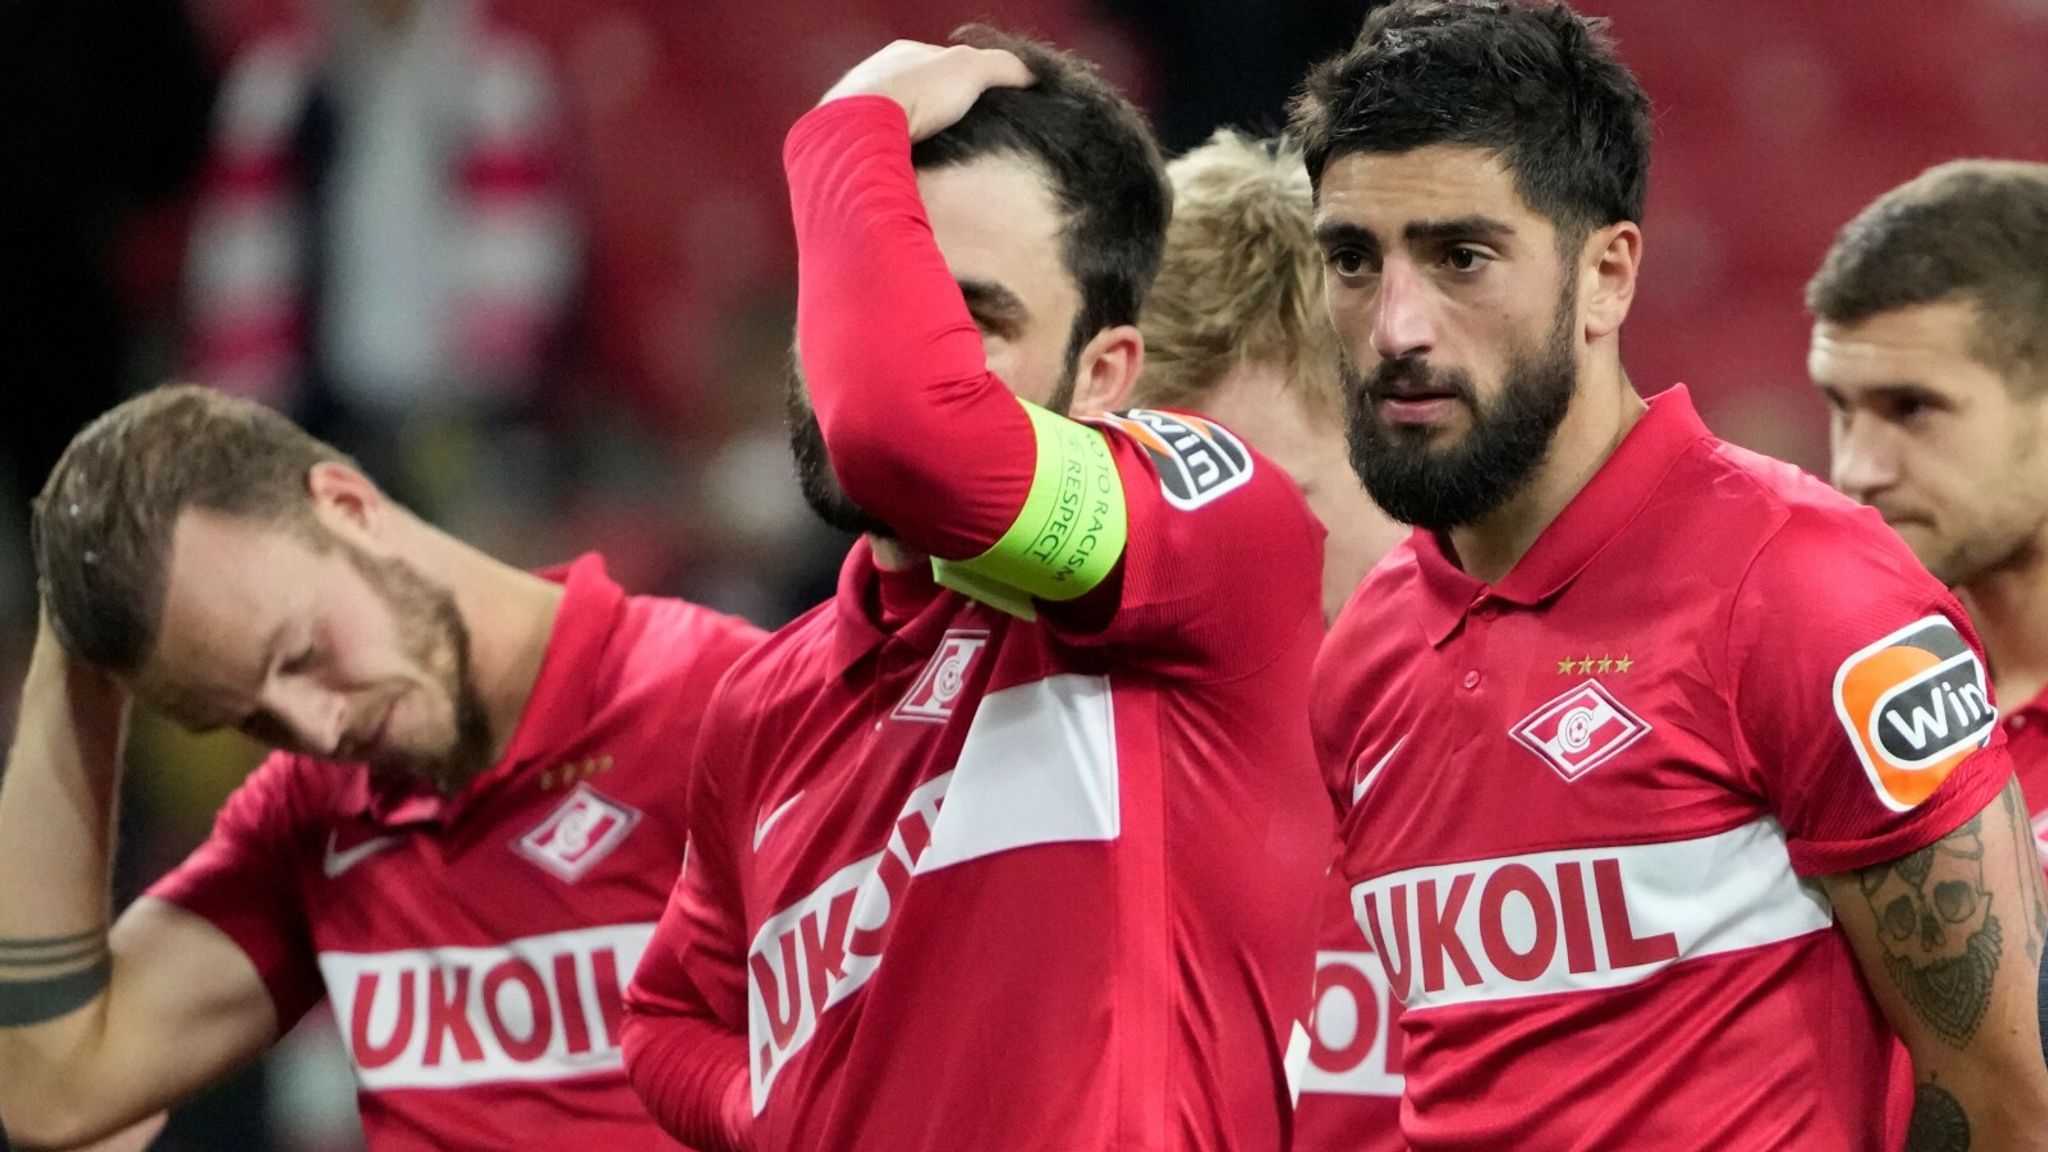 Spartak Moscow to be expelled from the Europa League due to Russia’s invasion of Ukraine